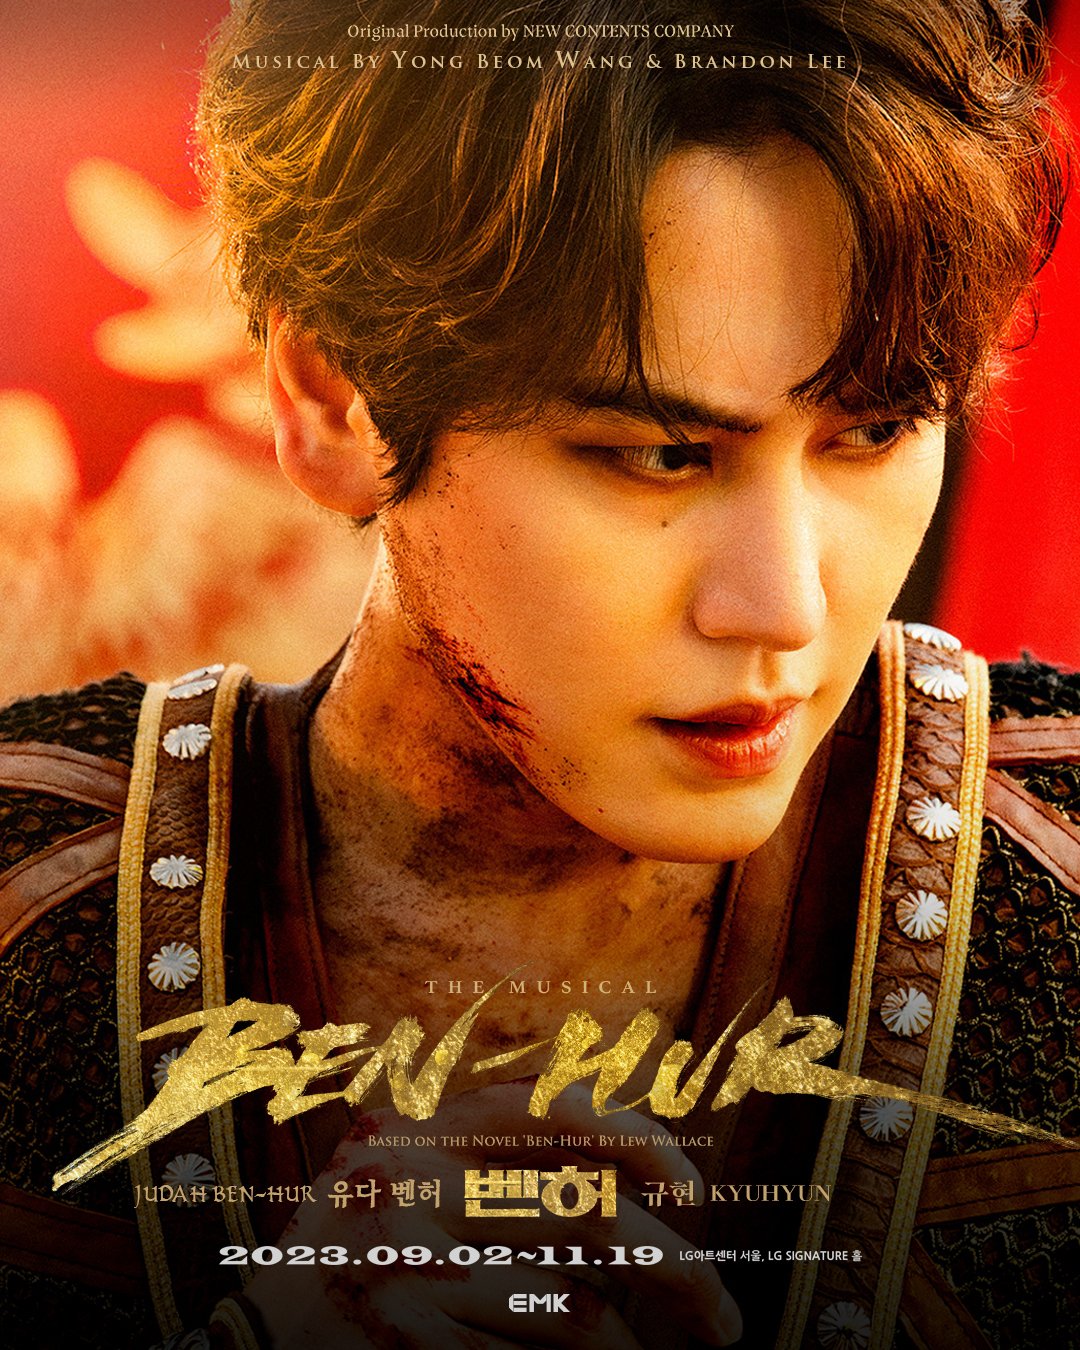 Super Junior's Kyuhyun will star as the title role in musical 'Ben Hur'